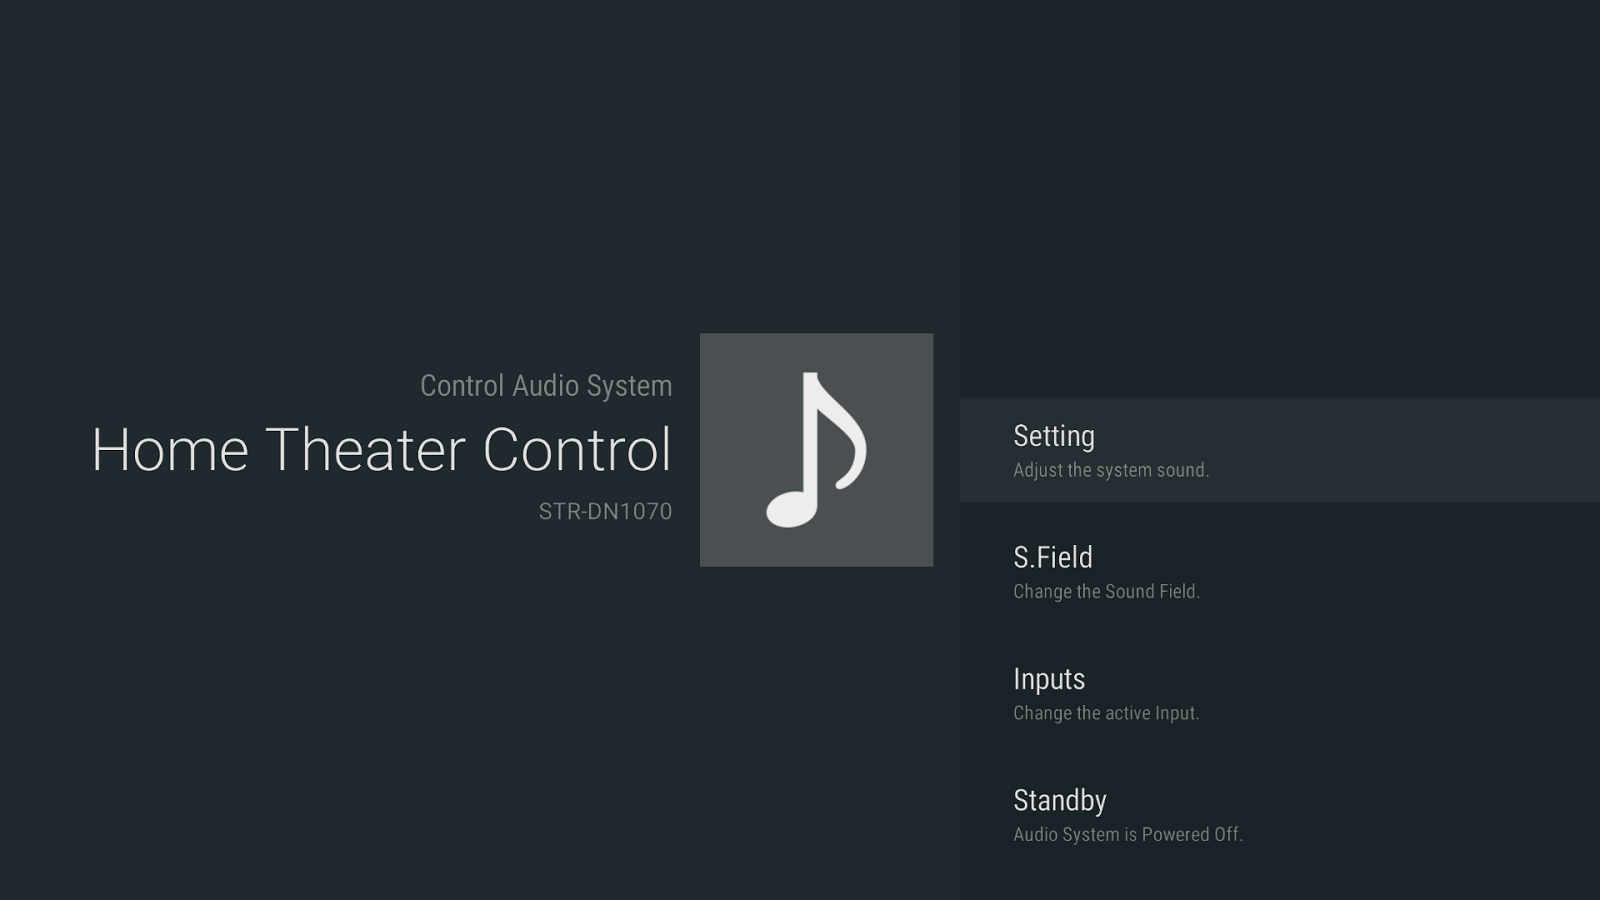 Home Theater Control